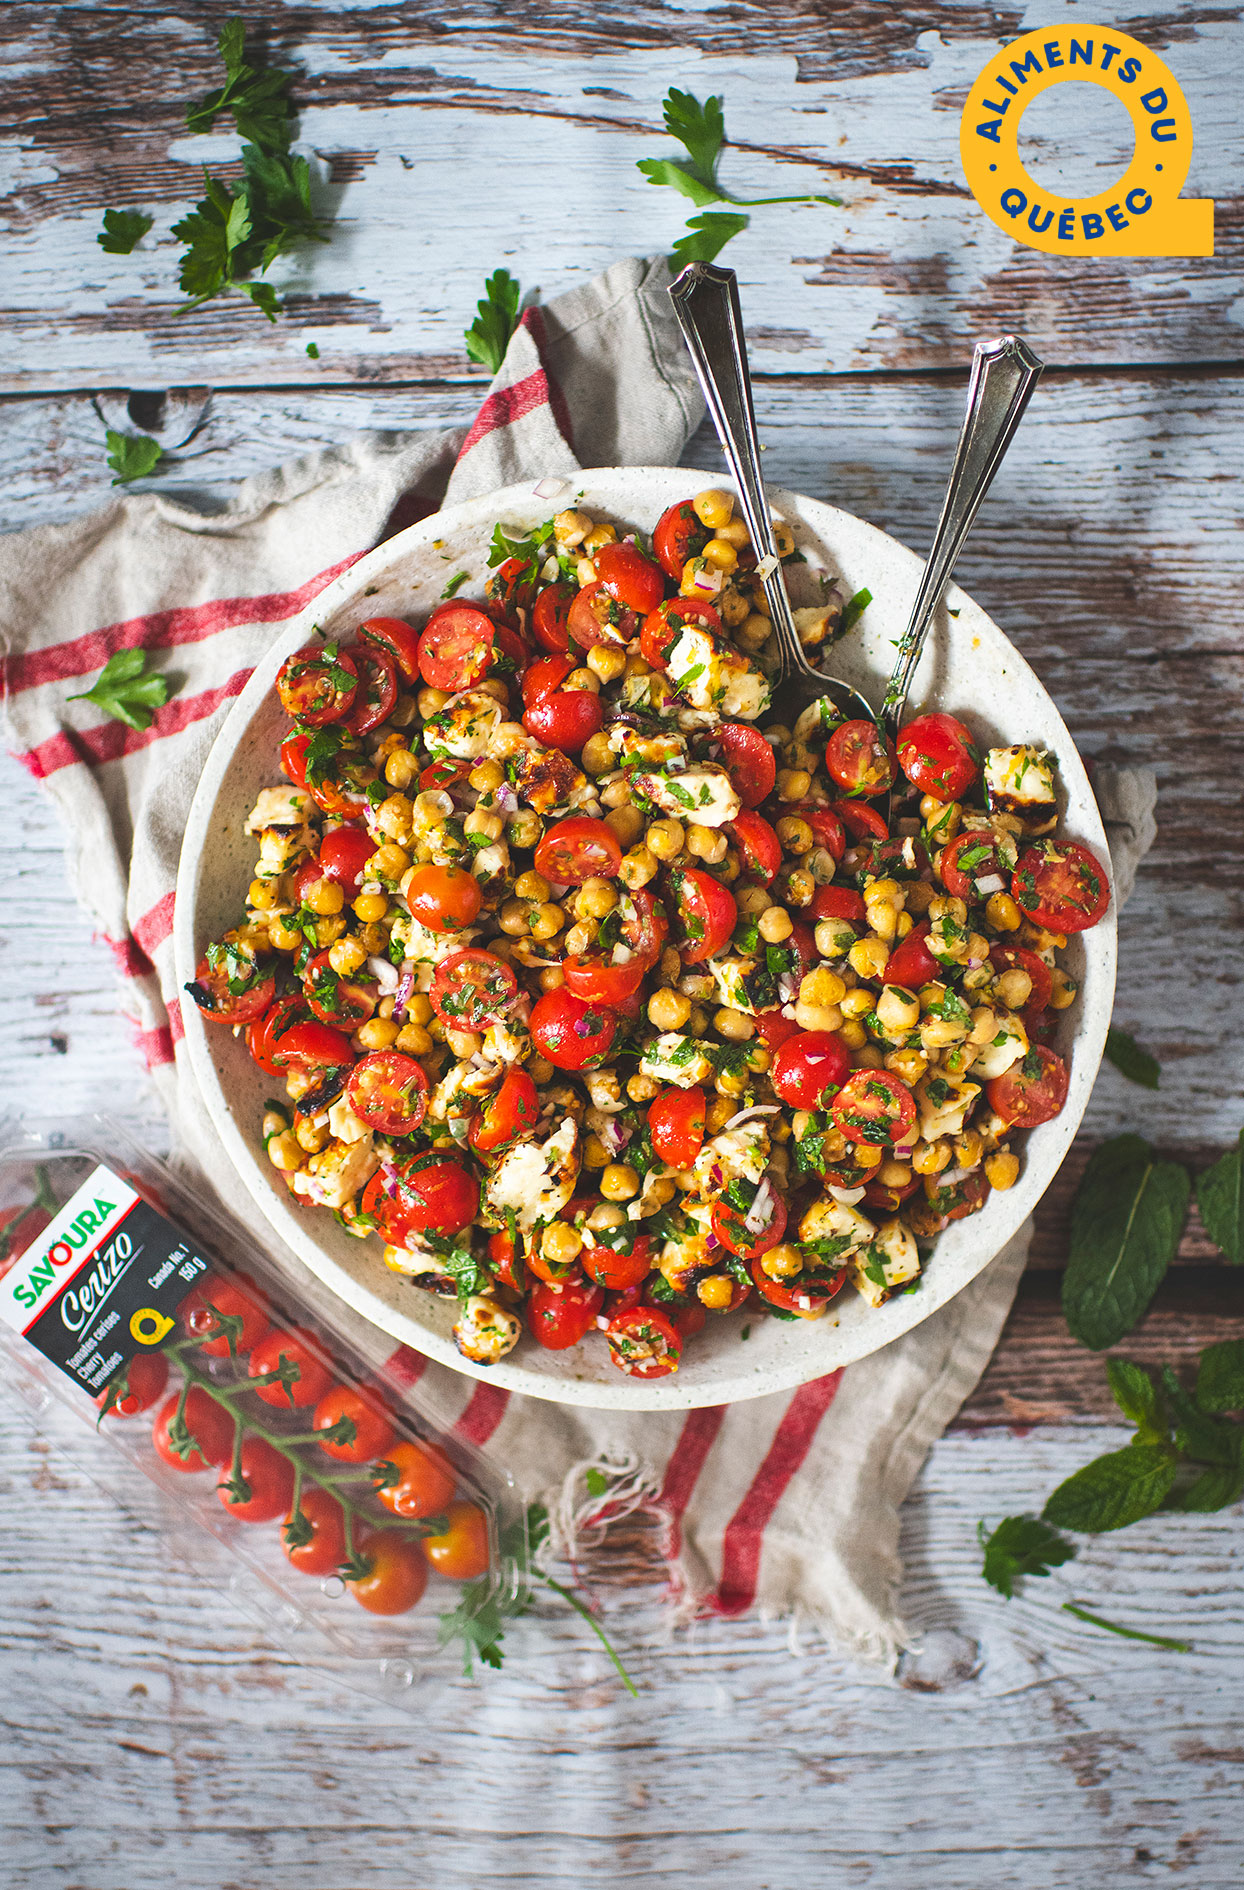 Cherry tomato salad with grilled chickpeas and halloumi